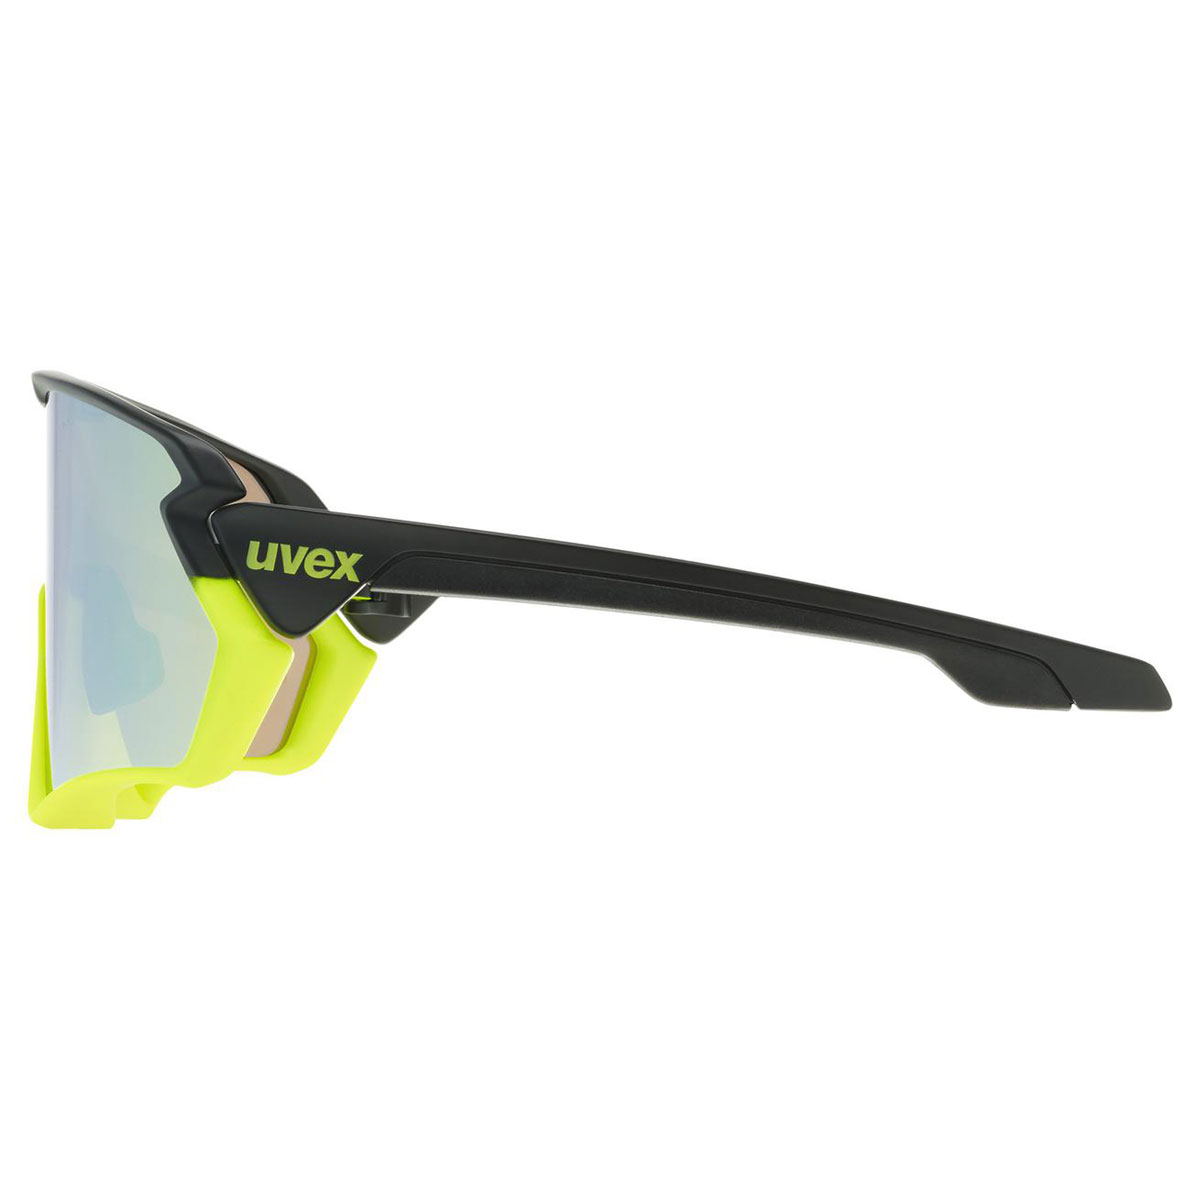 UVEX Sportstyle 231 Black Lime Mat / Mirror Yellow (s5320652616)